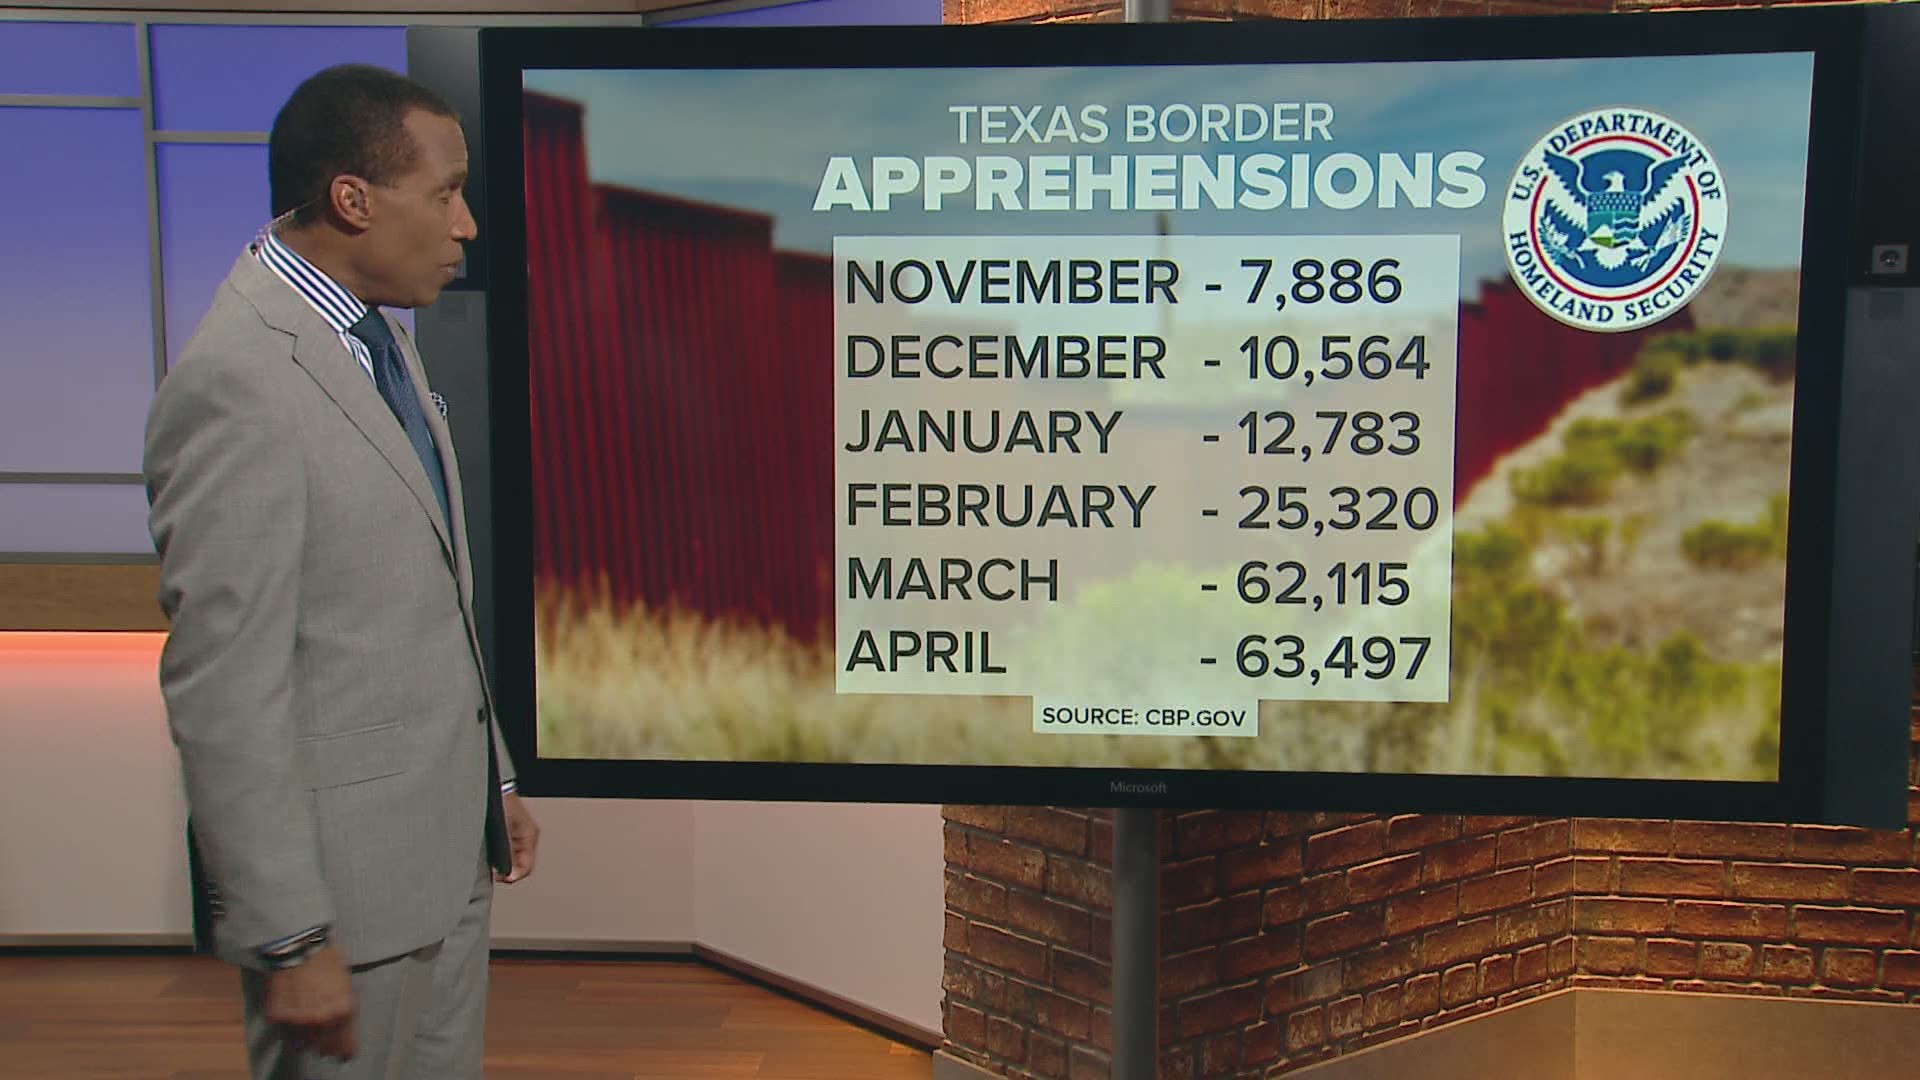 Gov. Greg Abbott issued a disaster declaration Monday along Texas' southern border in response to what the governor calls the "border crisis."